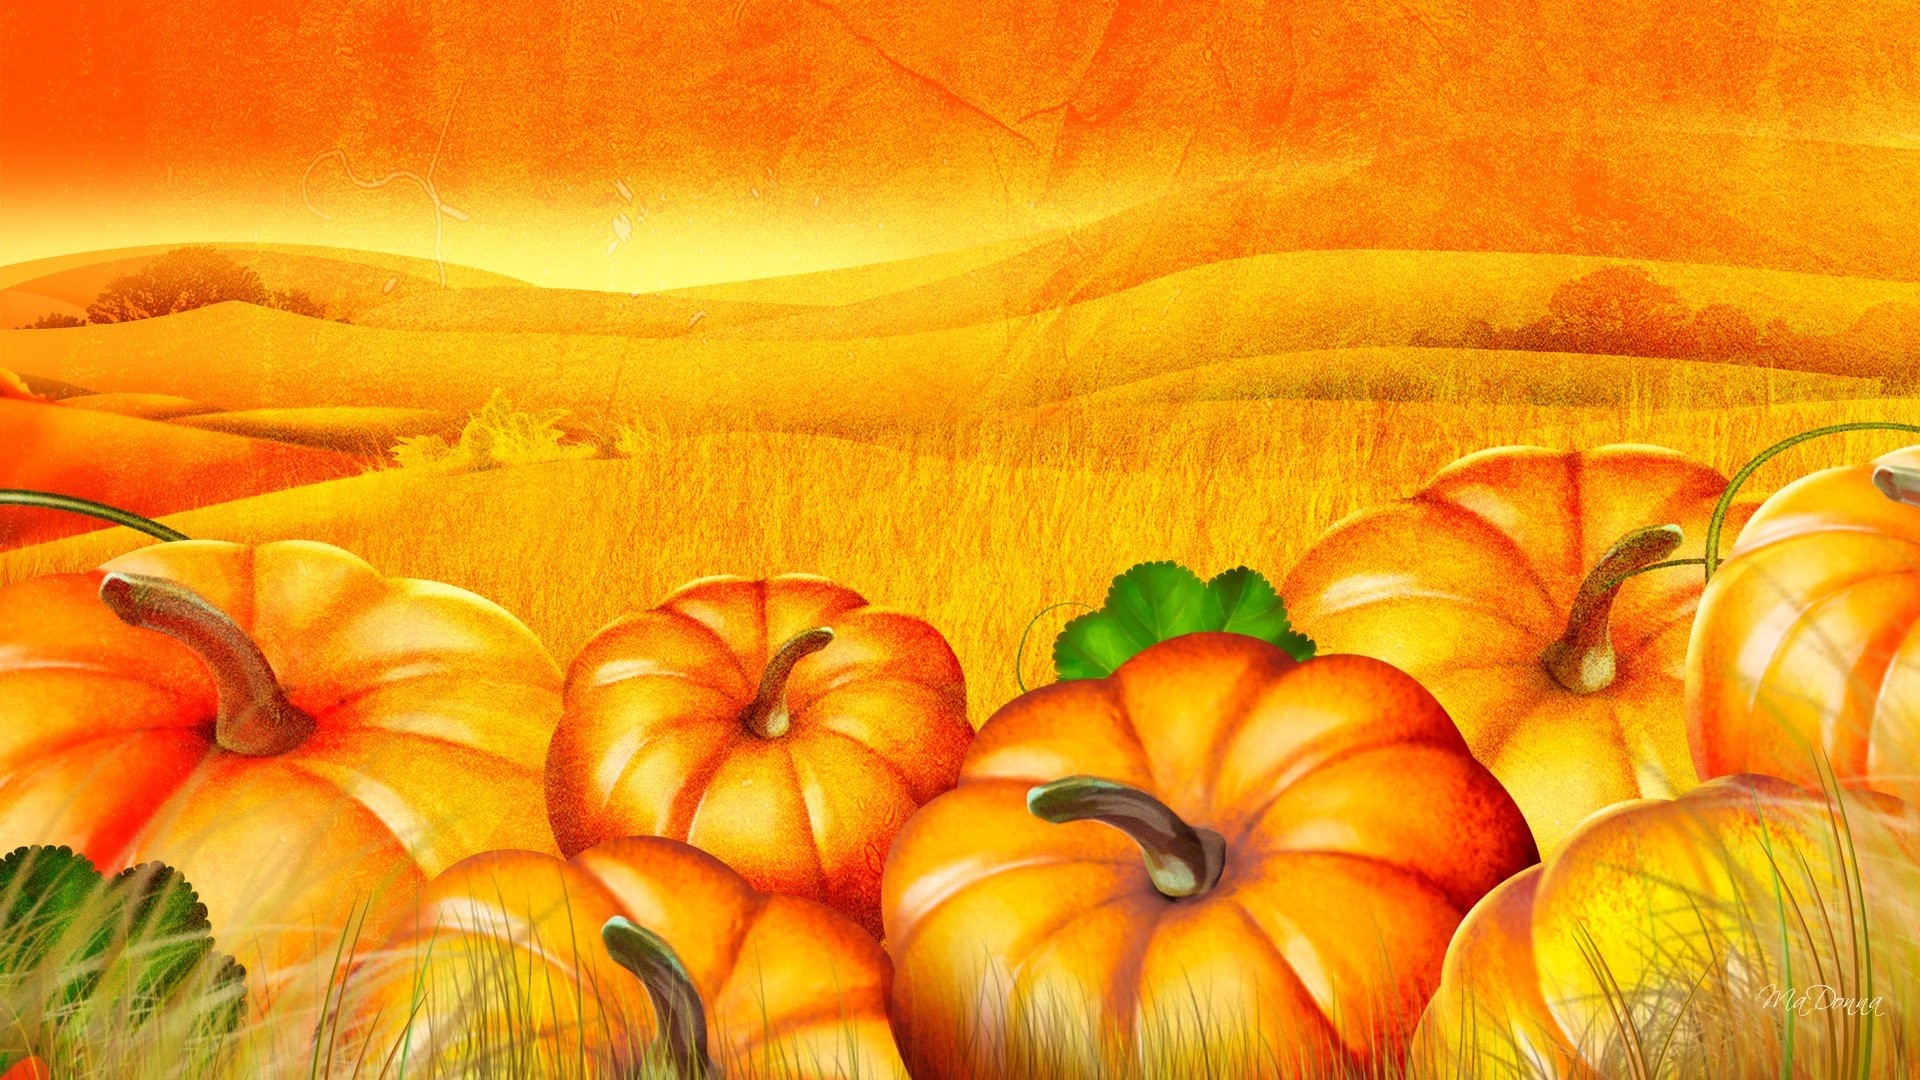 Pumpkin wallpapers hd desktop backgrounds images and pictures